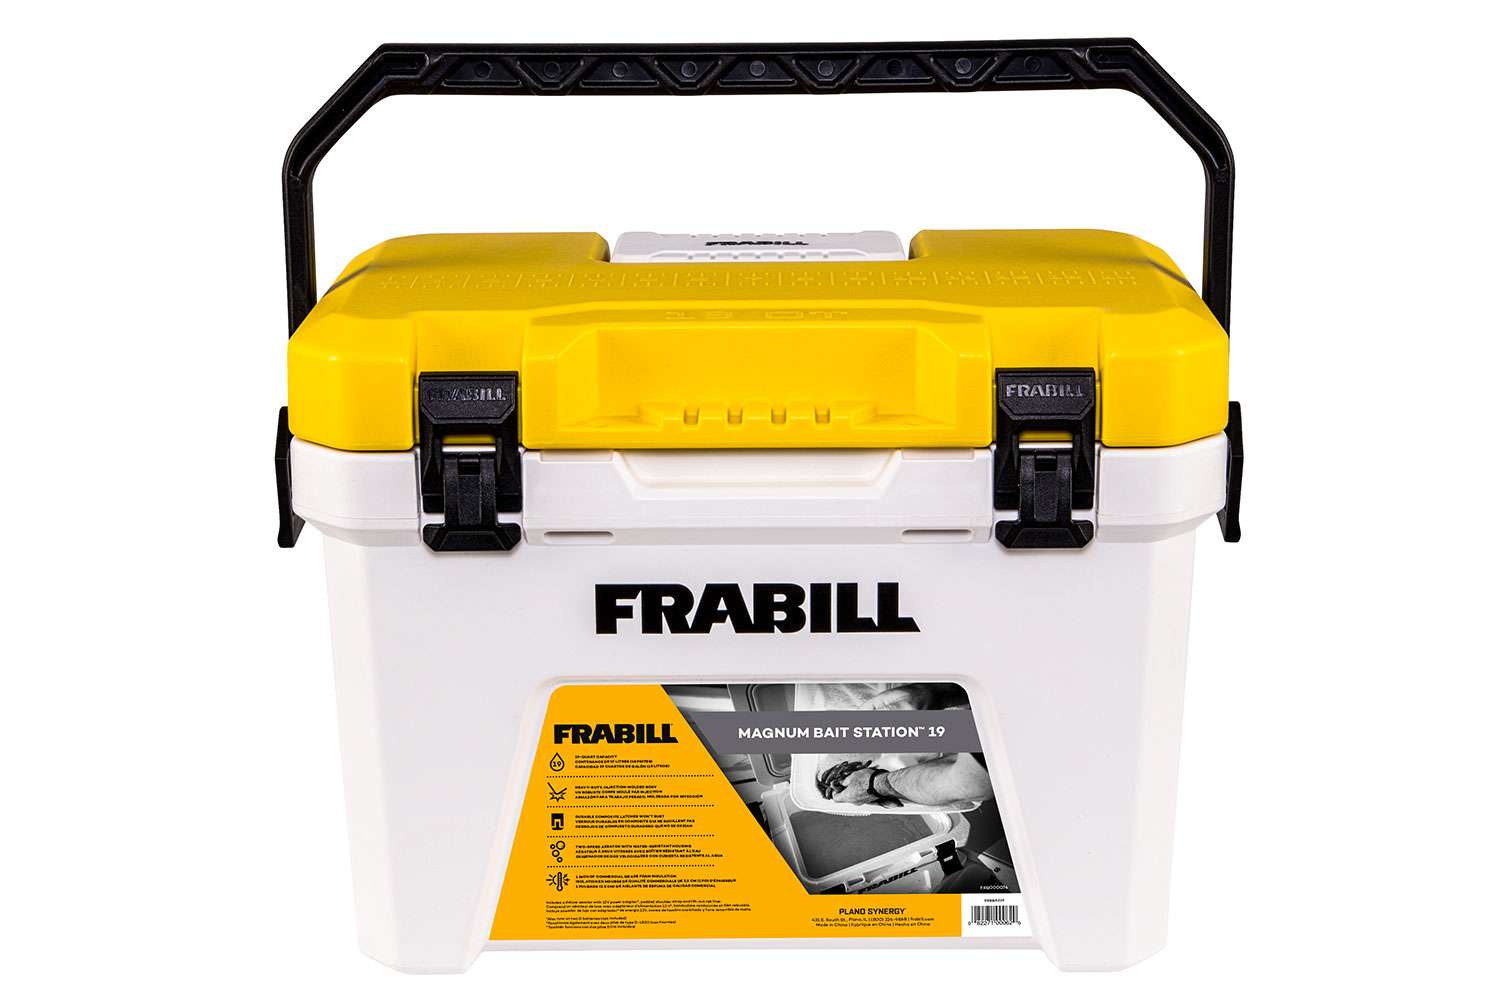 <p><b>Frabill Magnum Bait Station, $99.99</b></p> The new Frabill Magnum Bait Station provides so much more than transportation. With an injection-molded base, commercial grade foam insulation and an integrated aerator, it creates the perfect internal environment to keep bait healthy - regardless of the weather.<br> <a href=